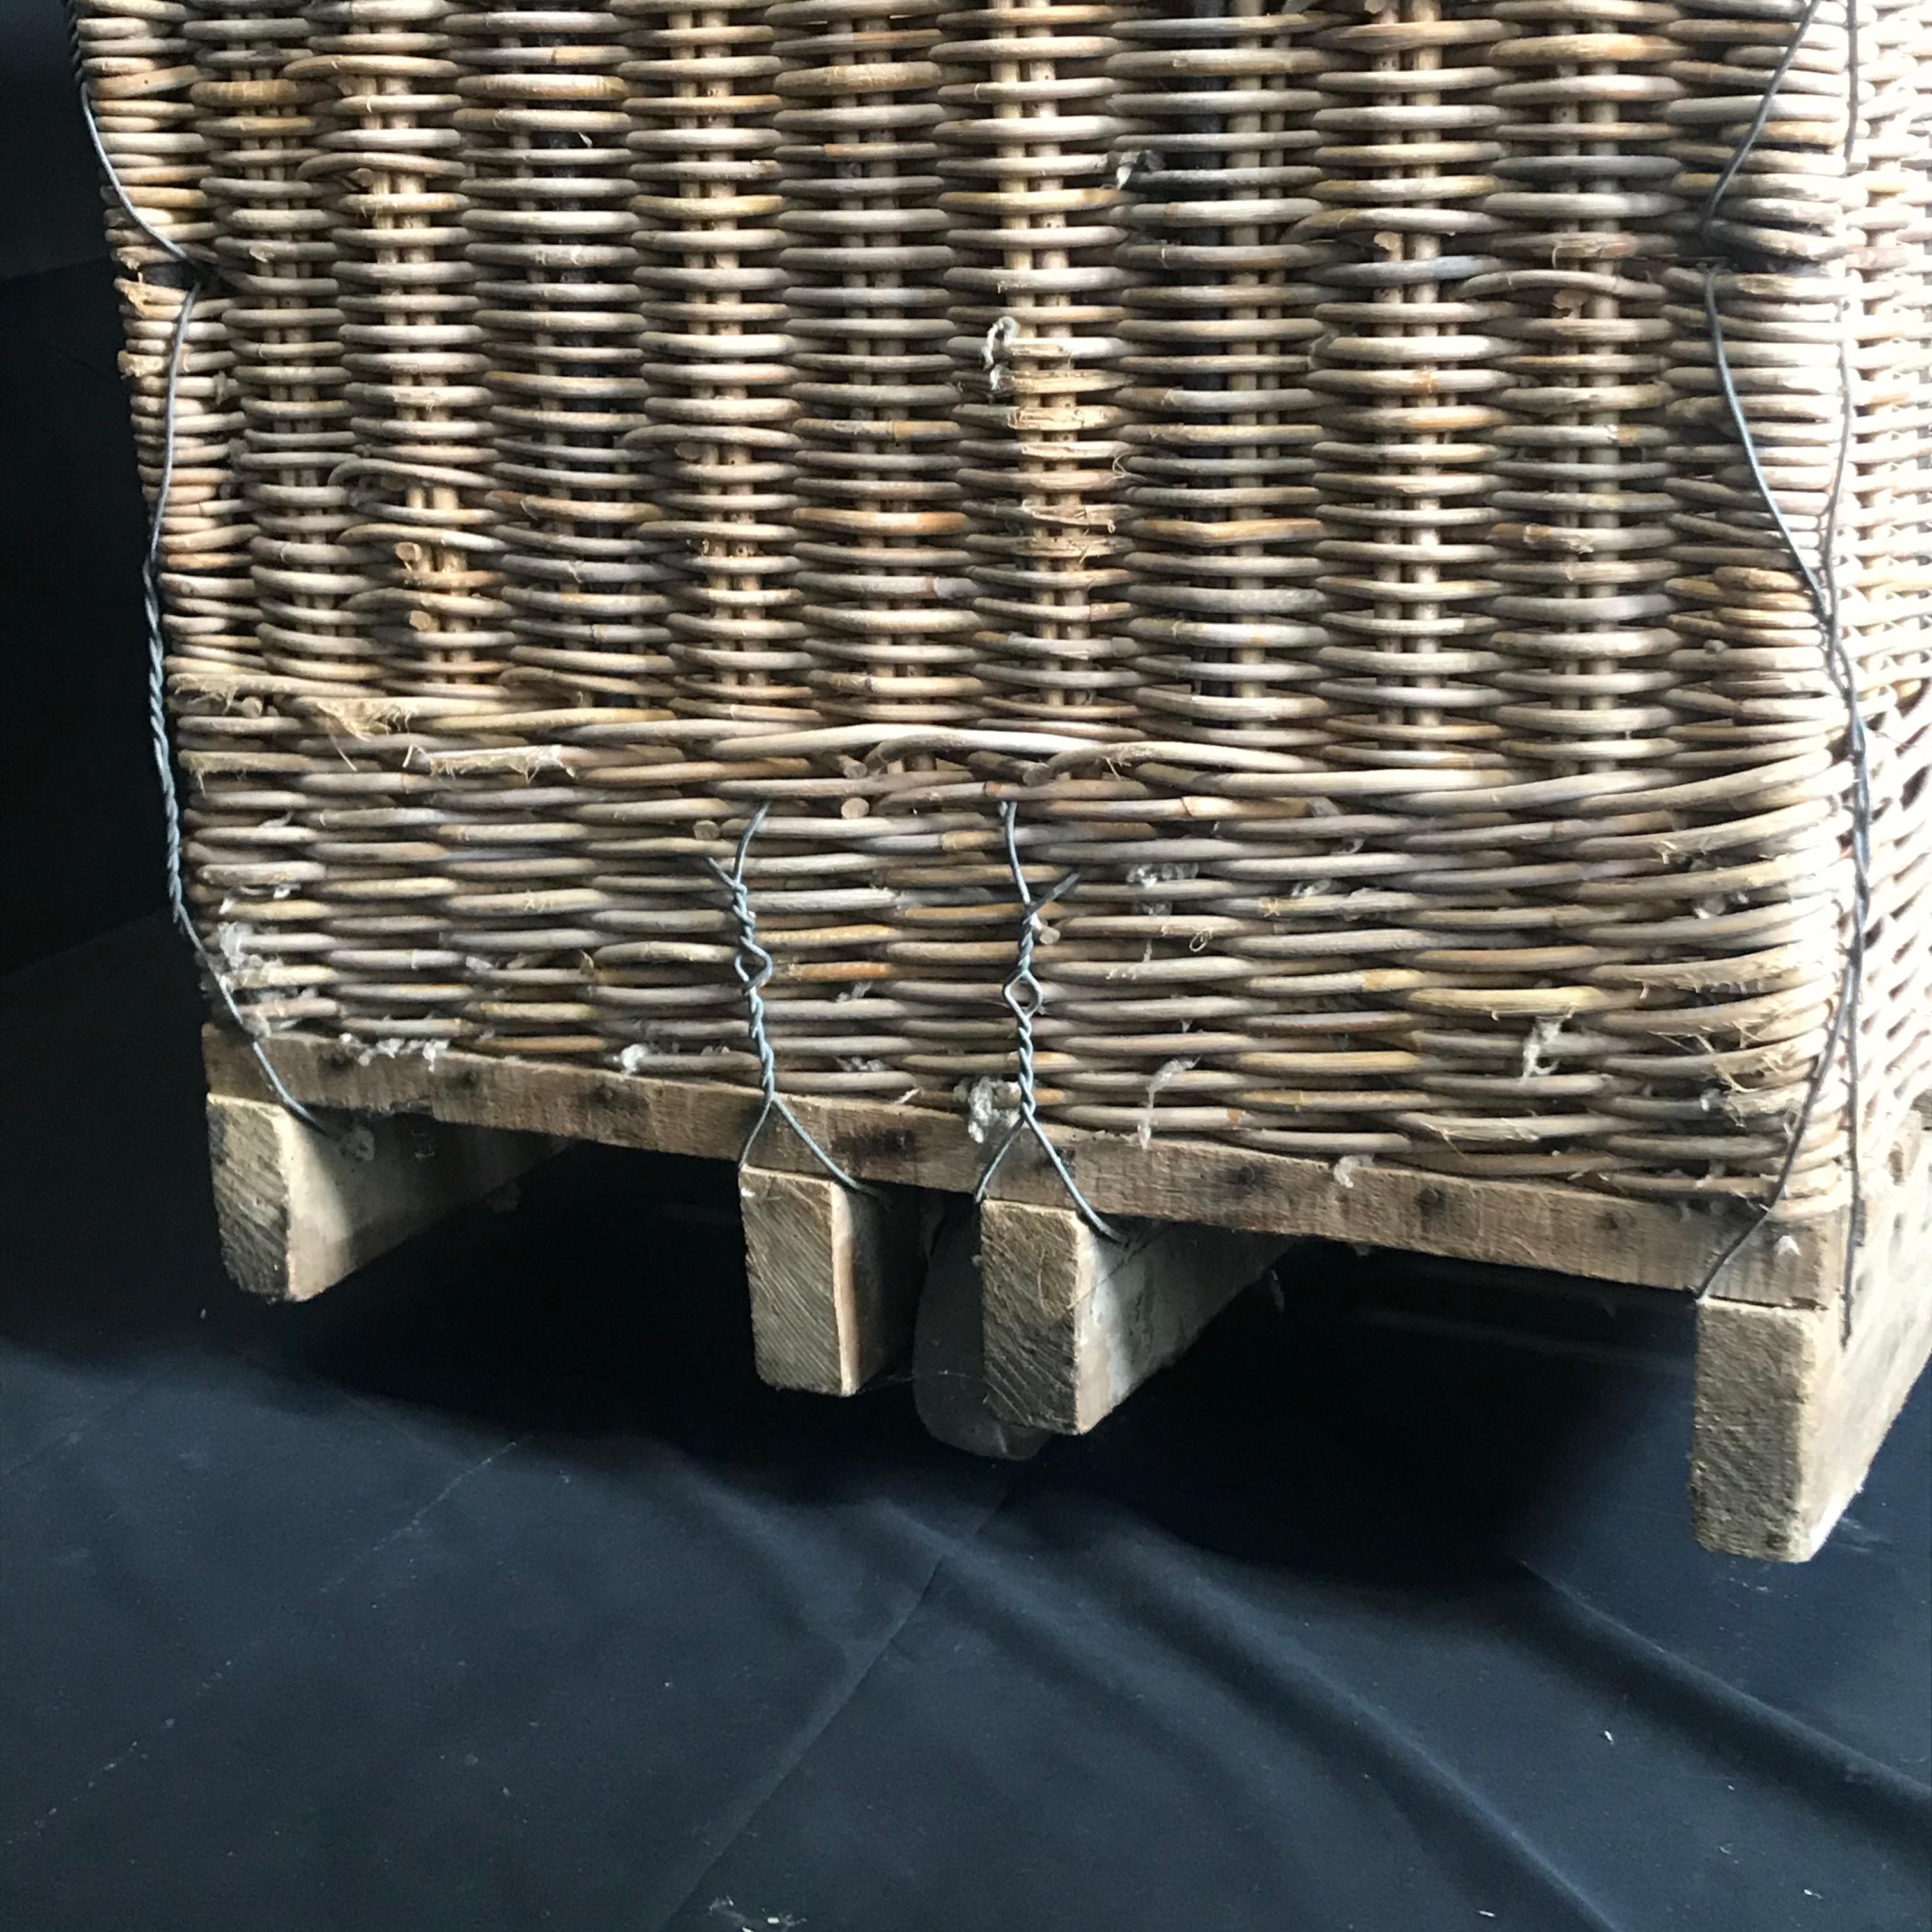 French Large Boulangerie Industrial Woven Cart Basket on Wheels 1